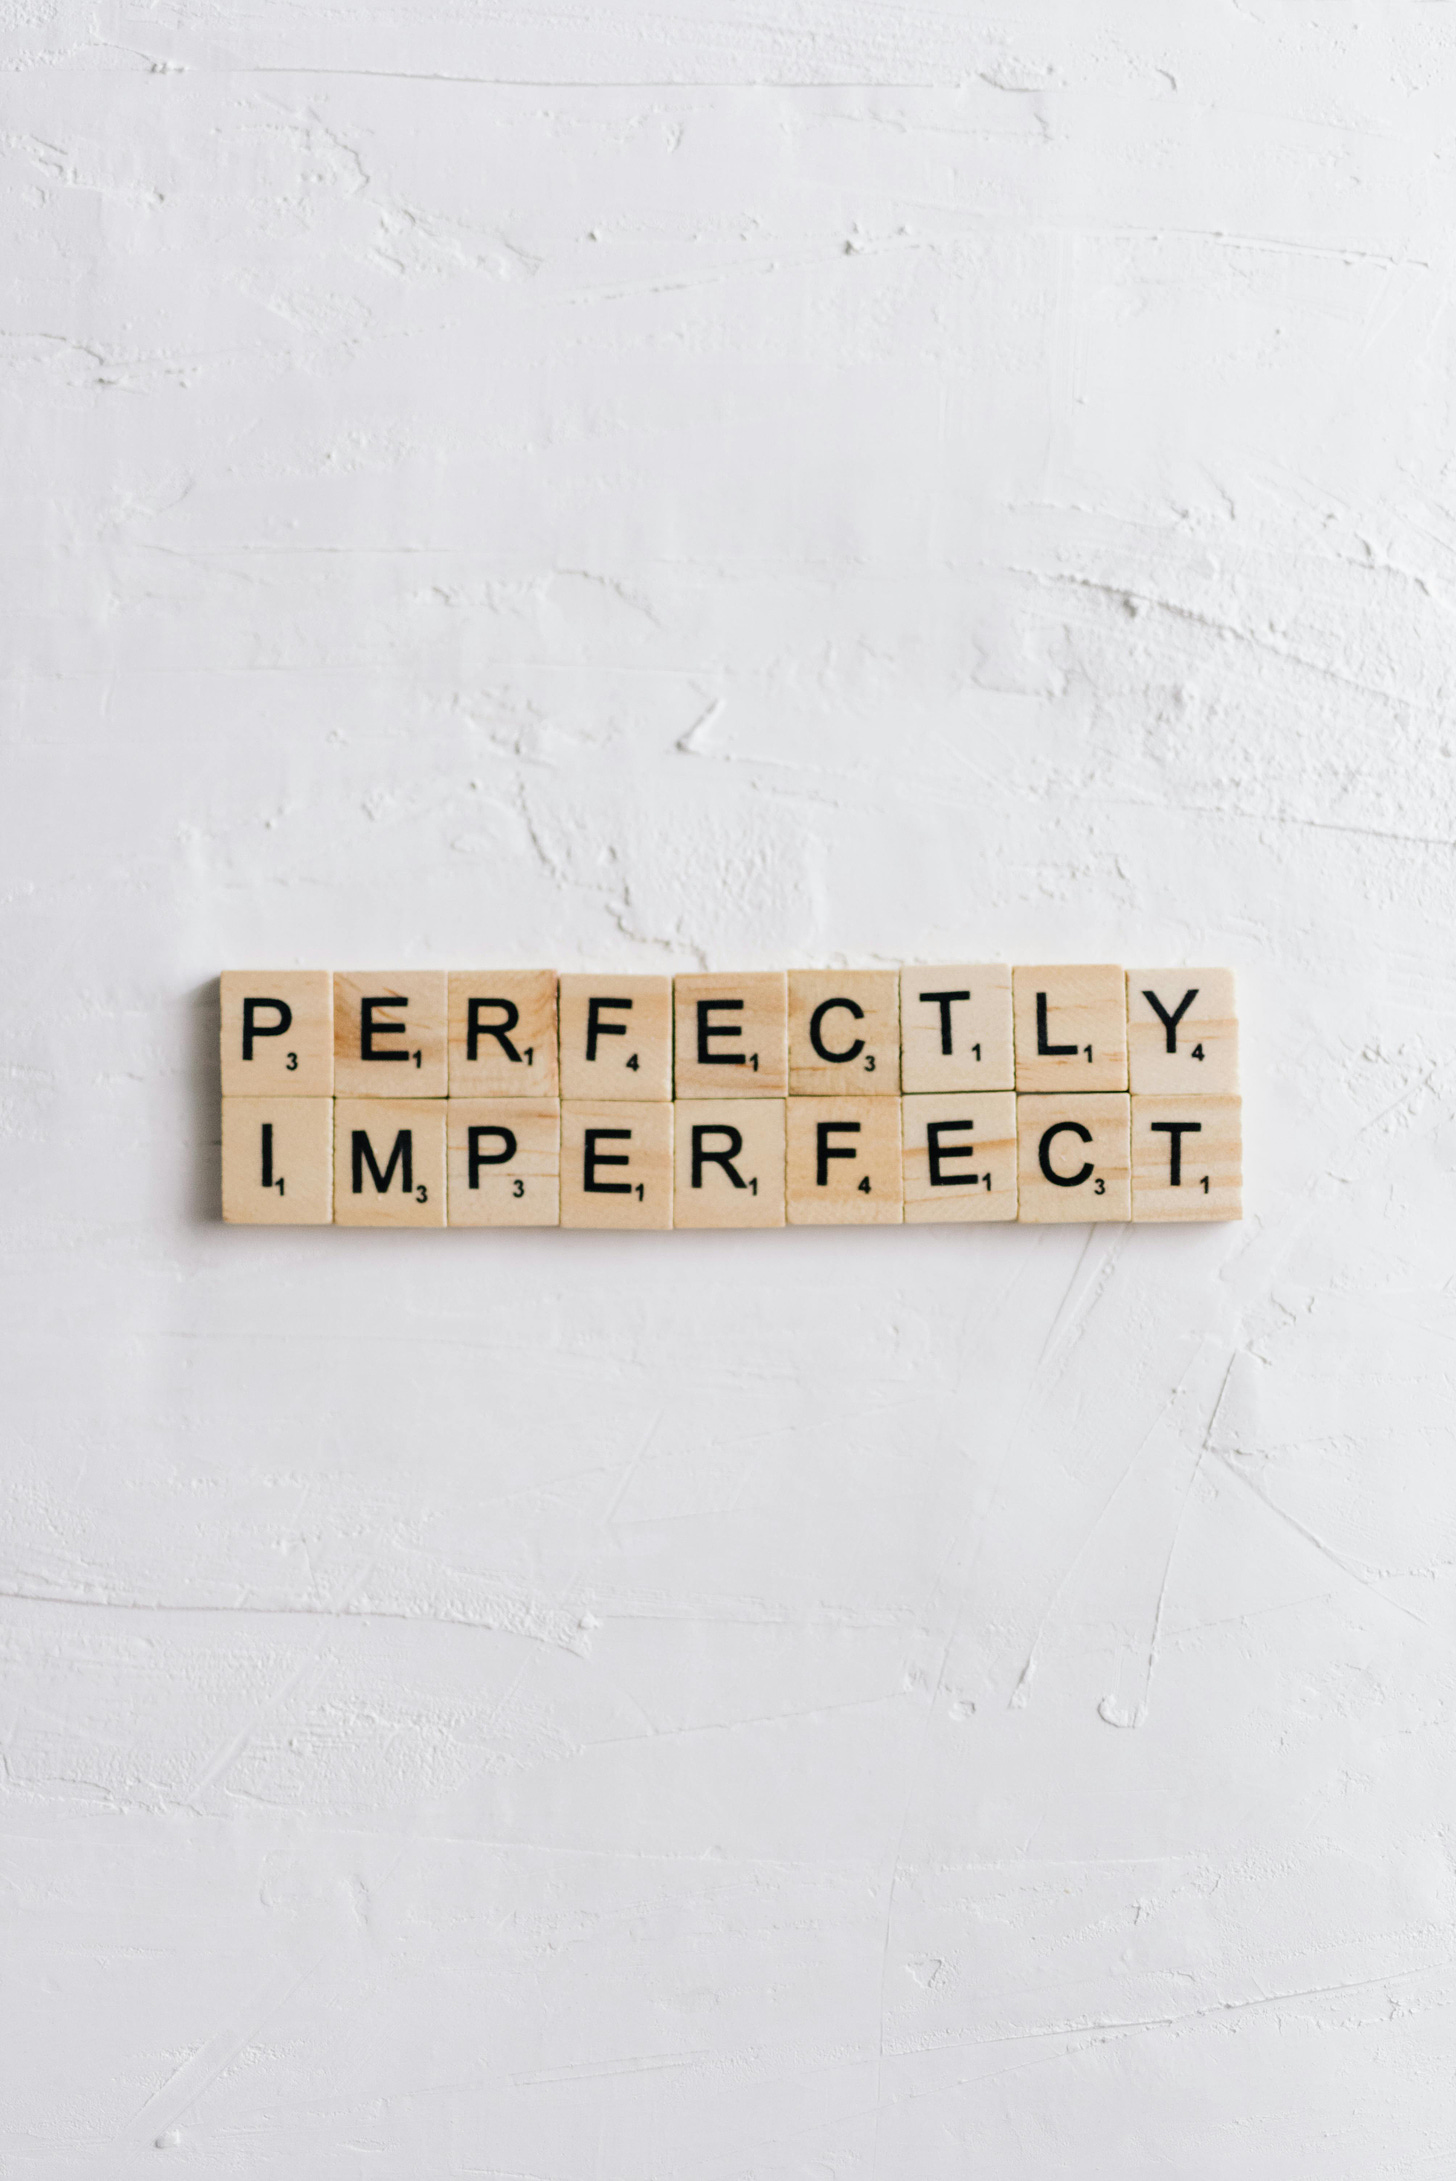 Scrabble tiles with the words "perfectly imperfect"